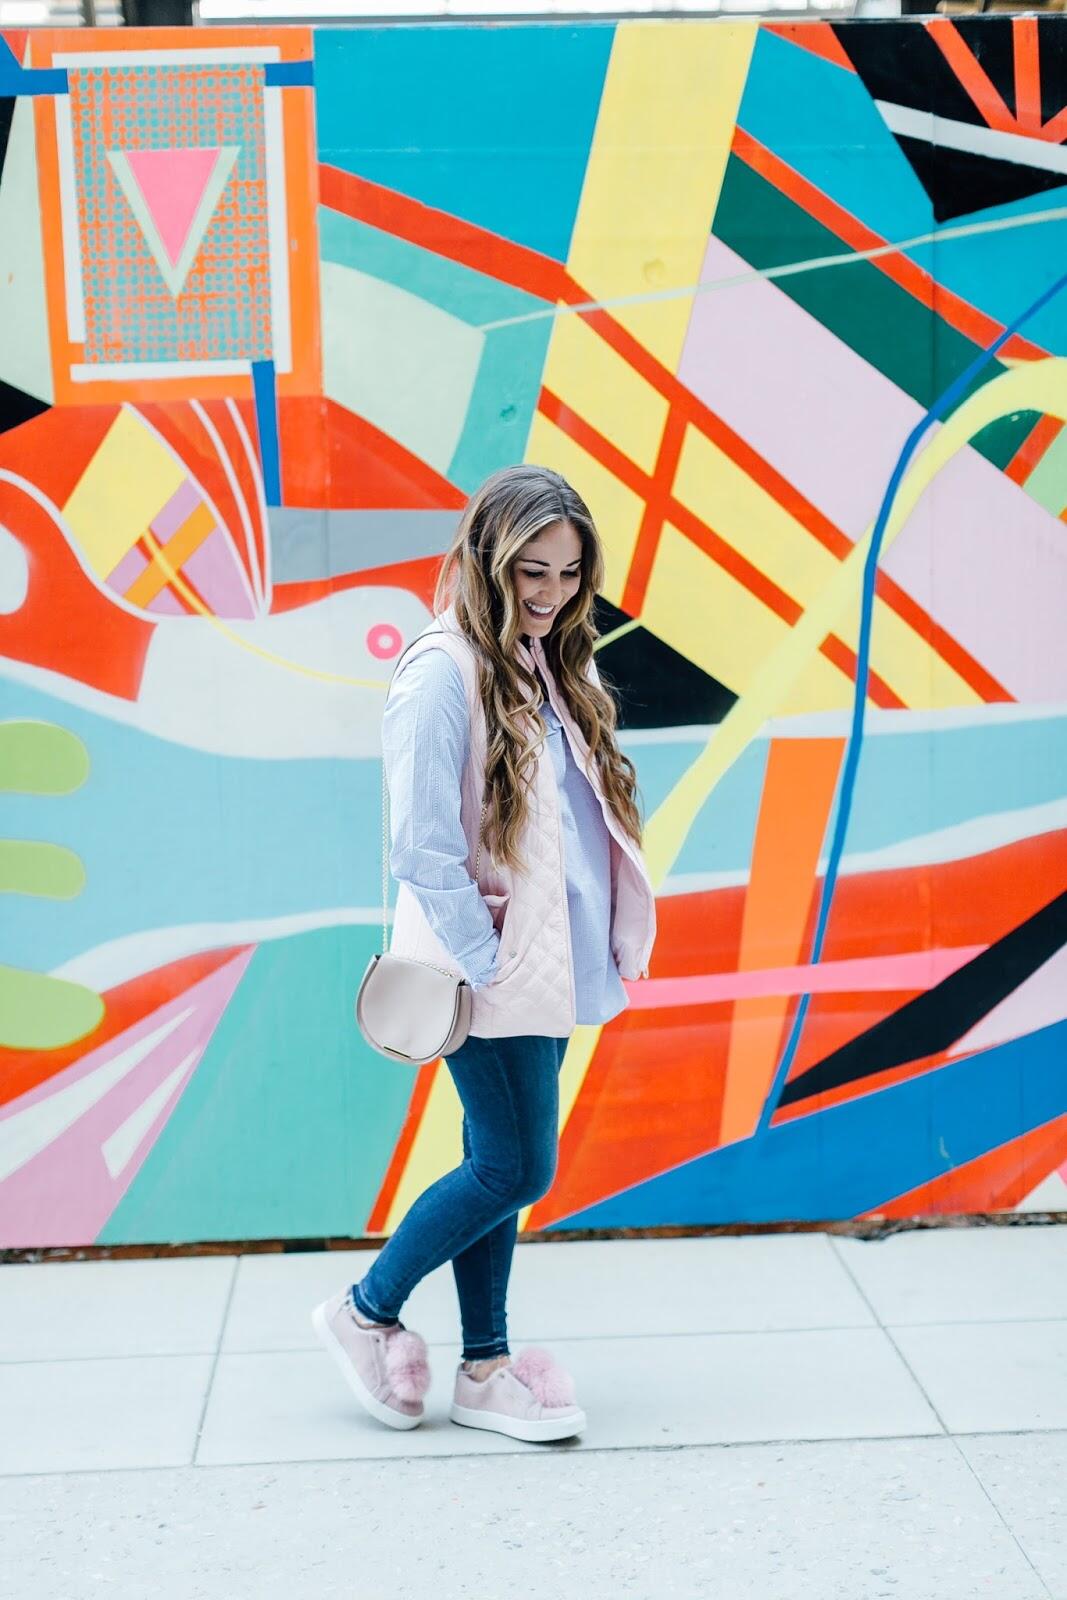 Trend Spin Linkup - Layers by Eat Memphis fashion blogger Walking in Memphis in High Heels